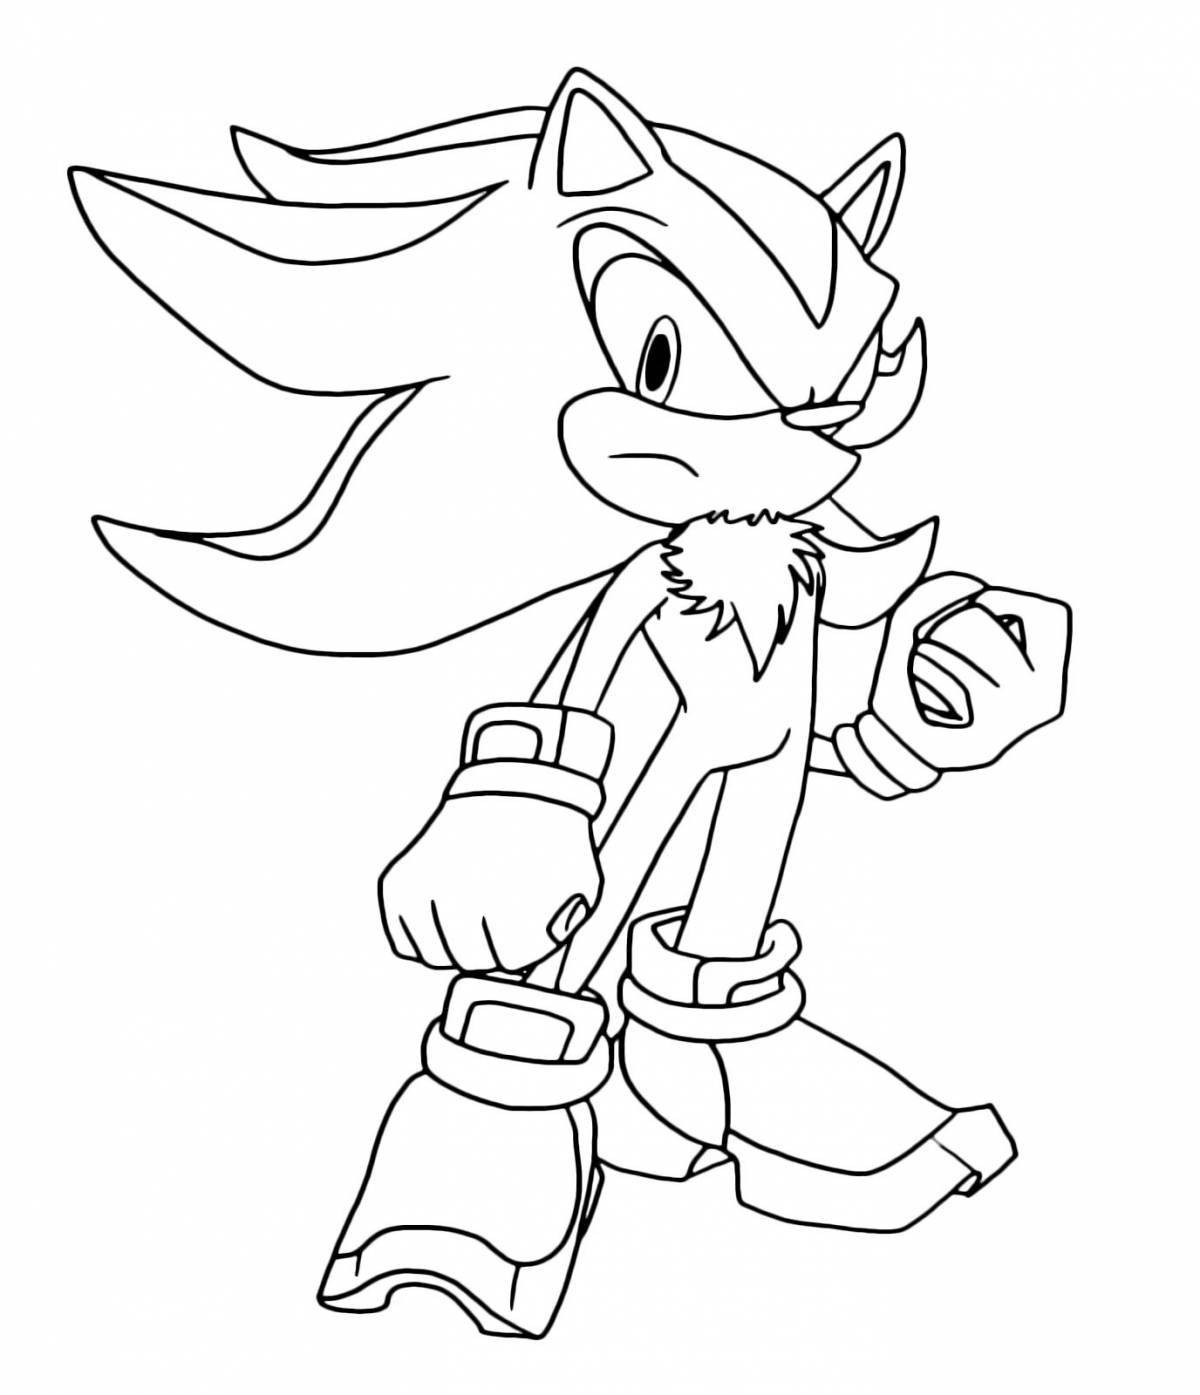 Glorious darkspine sonic coloring page